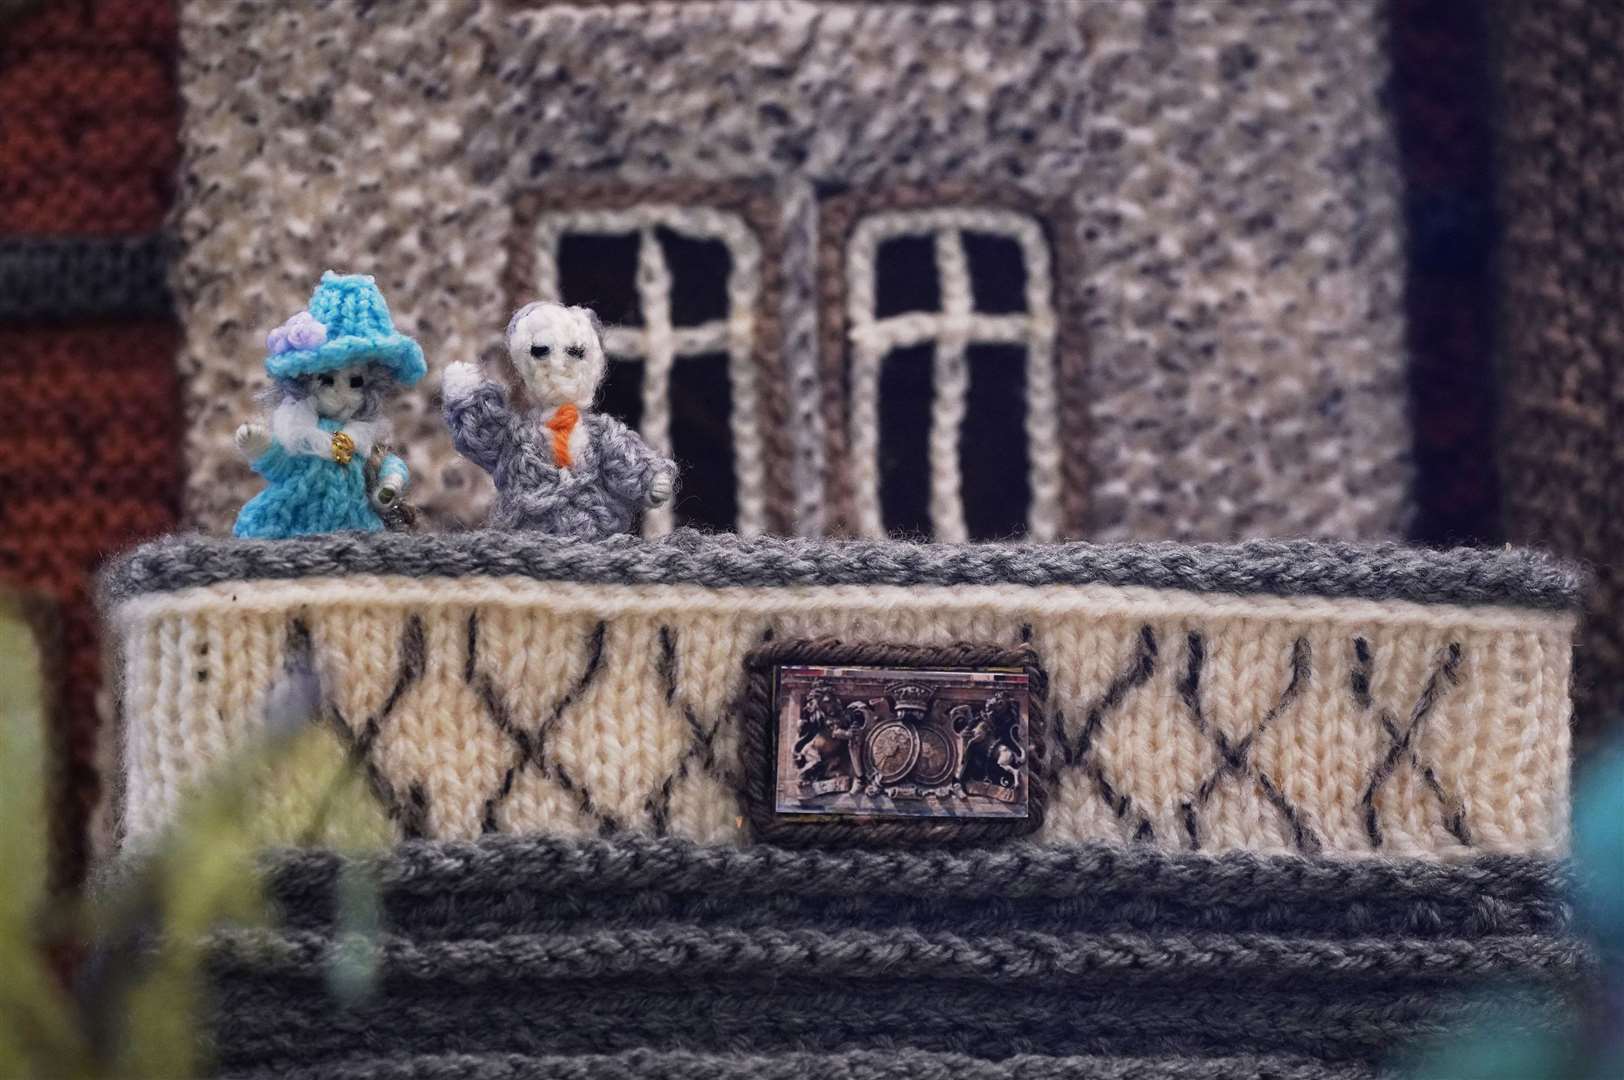 The knitted Sandringham model includes miniature woollen versions of the Queen and the Duke of Edinburgh on a balcony (Yui Mok/PA)